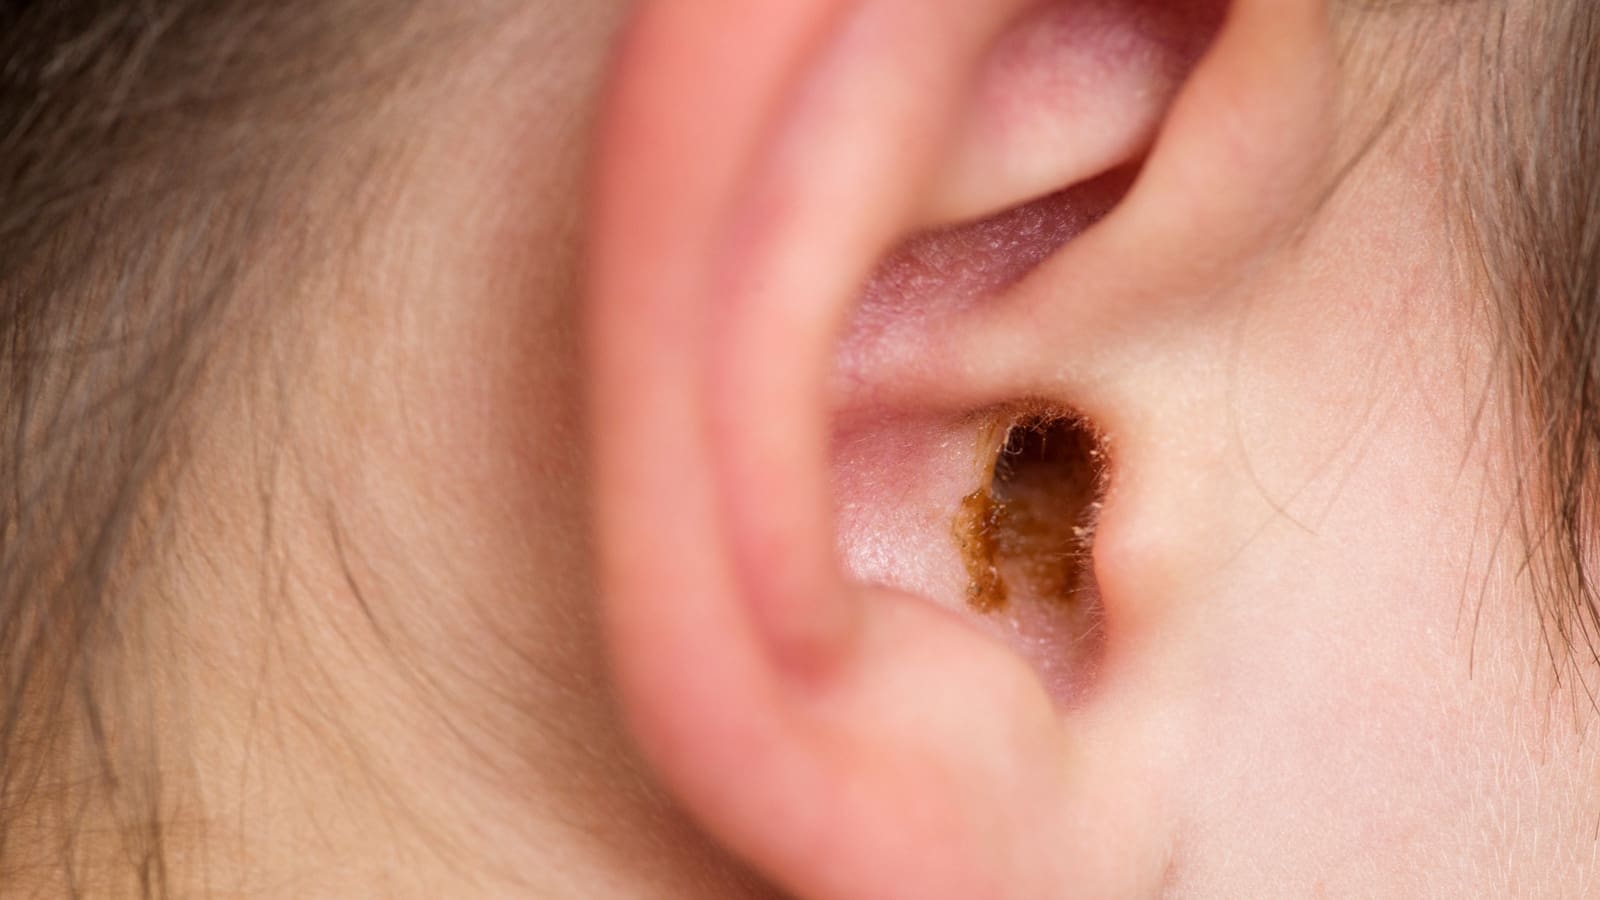 What happens if I have too much ear wax?